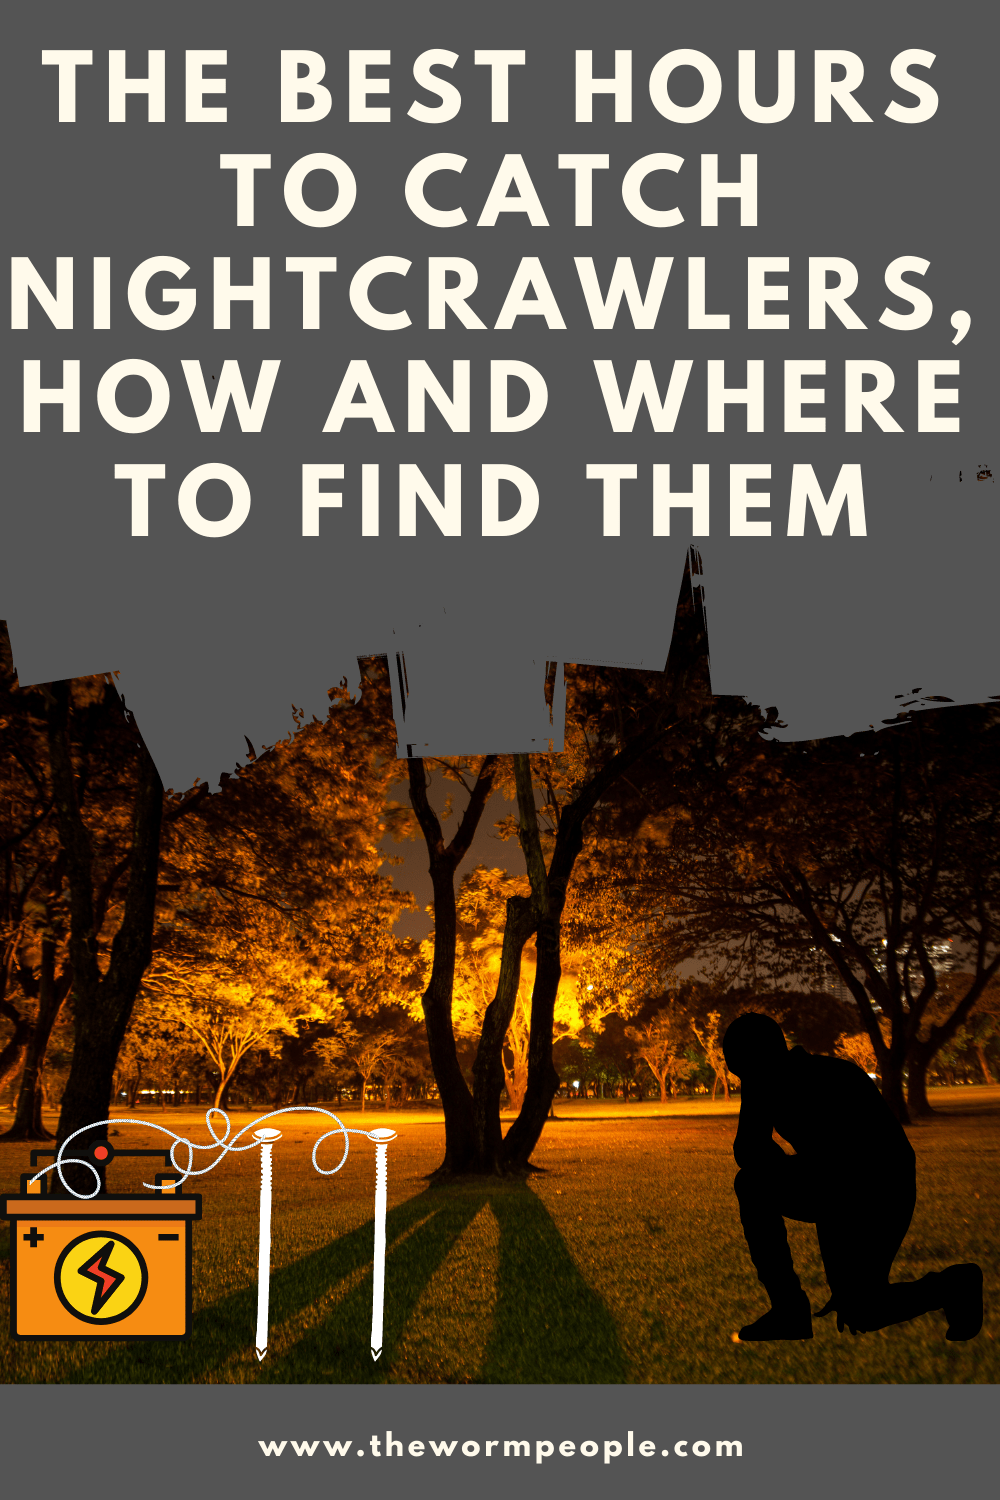 when-do-nightcrawlers-come-out-at-night